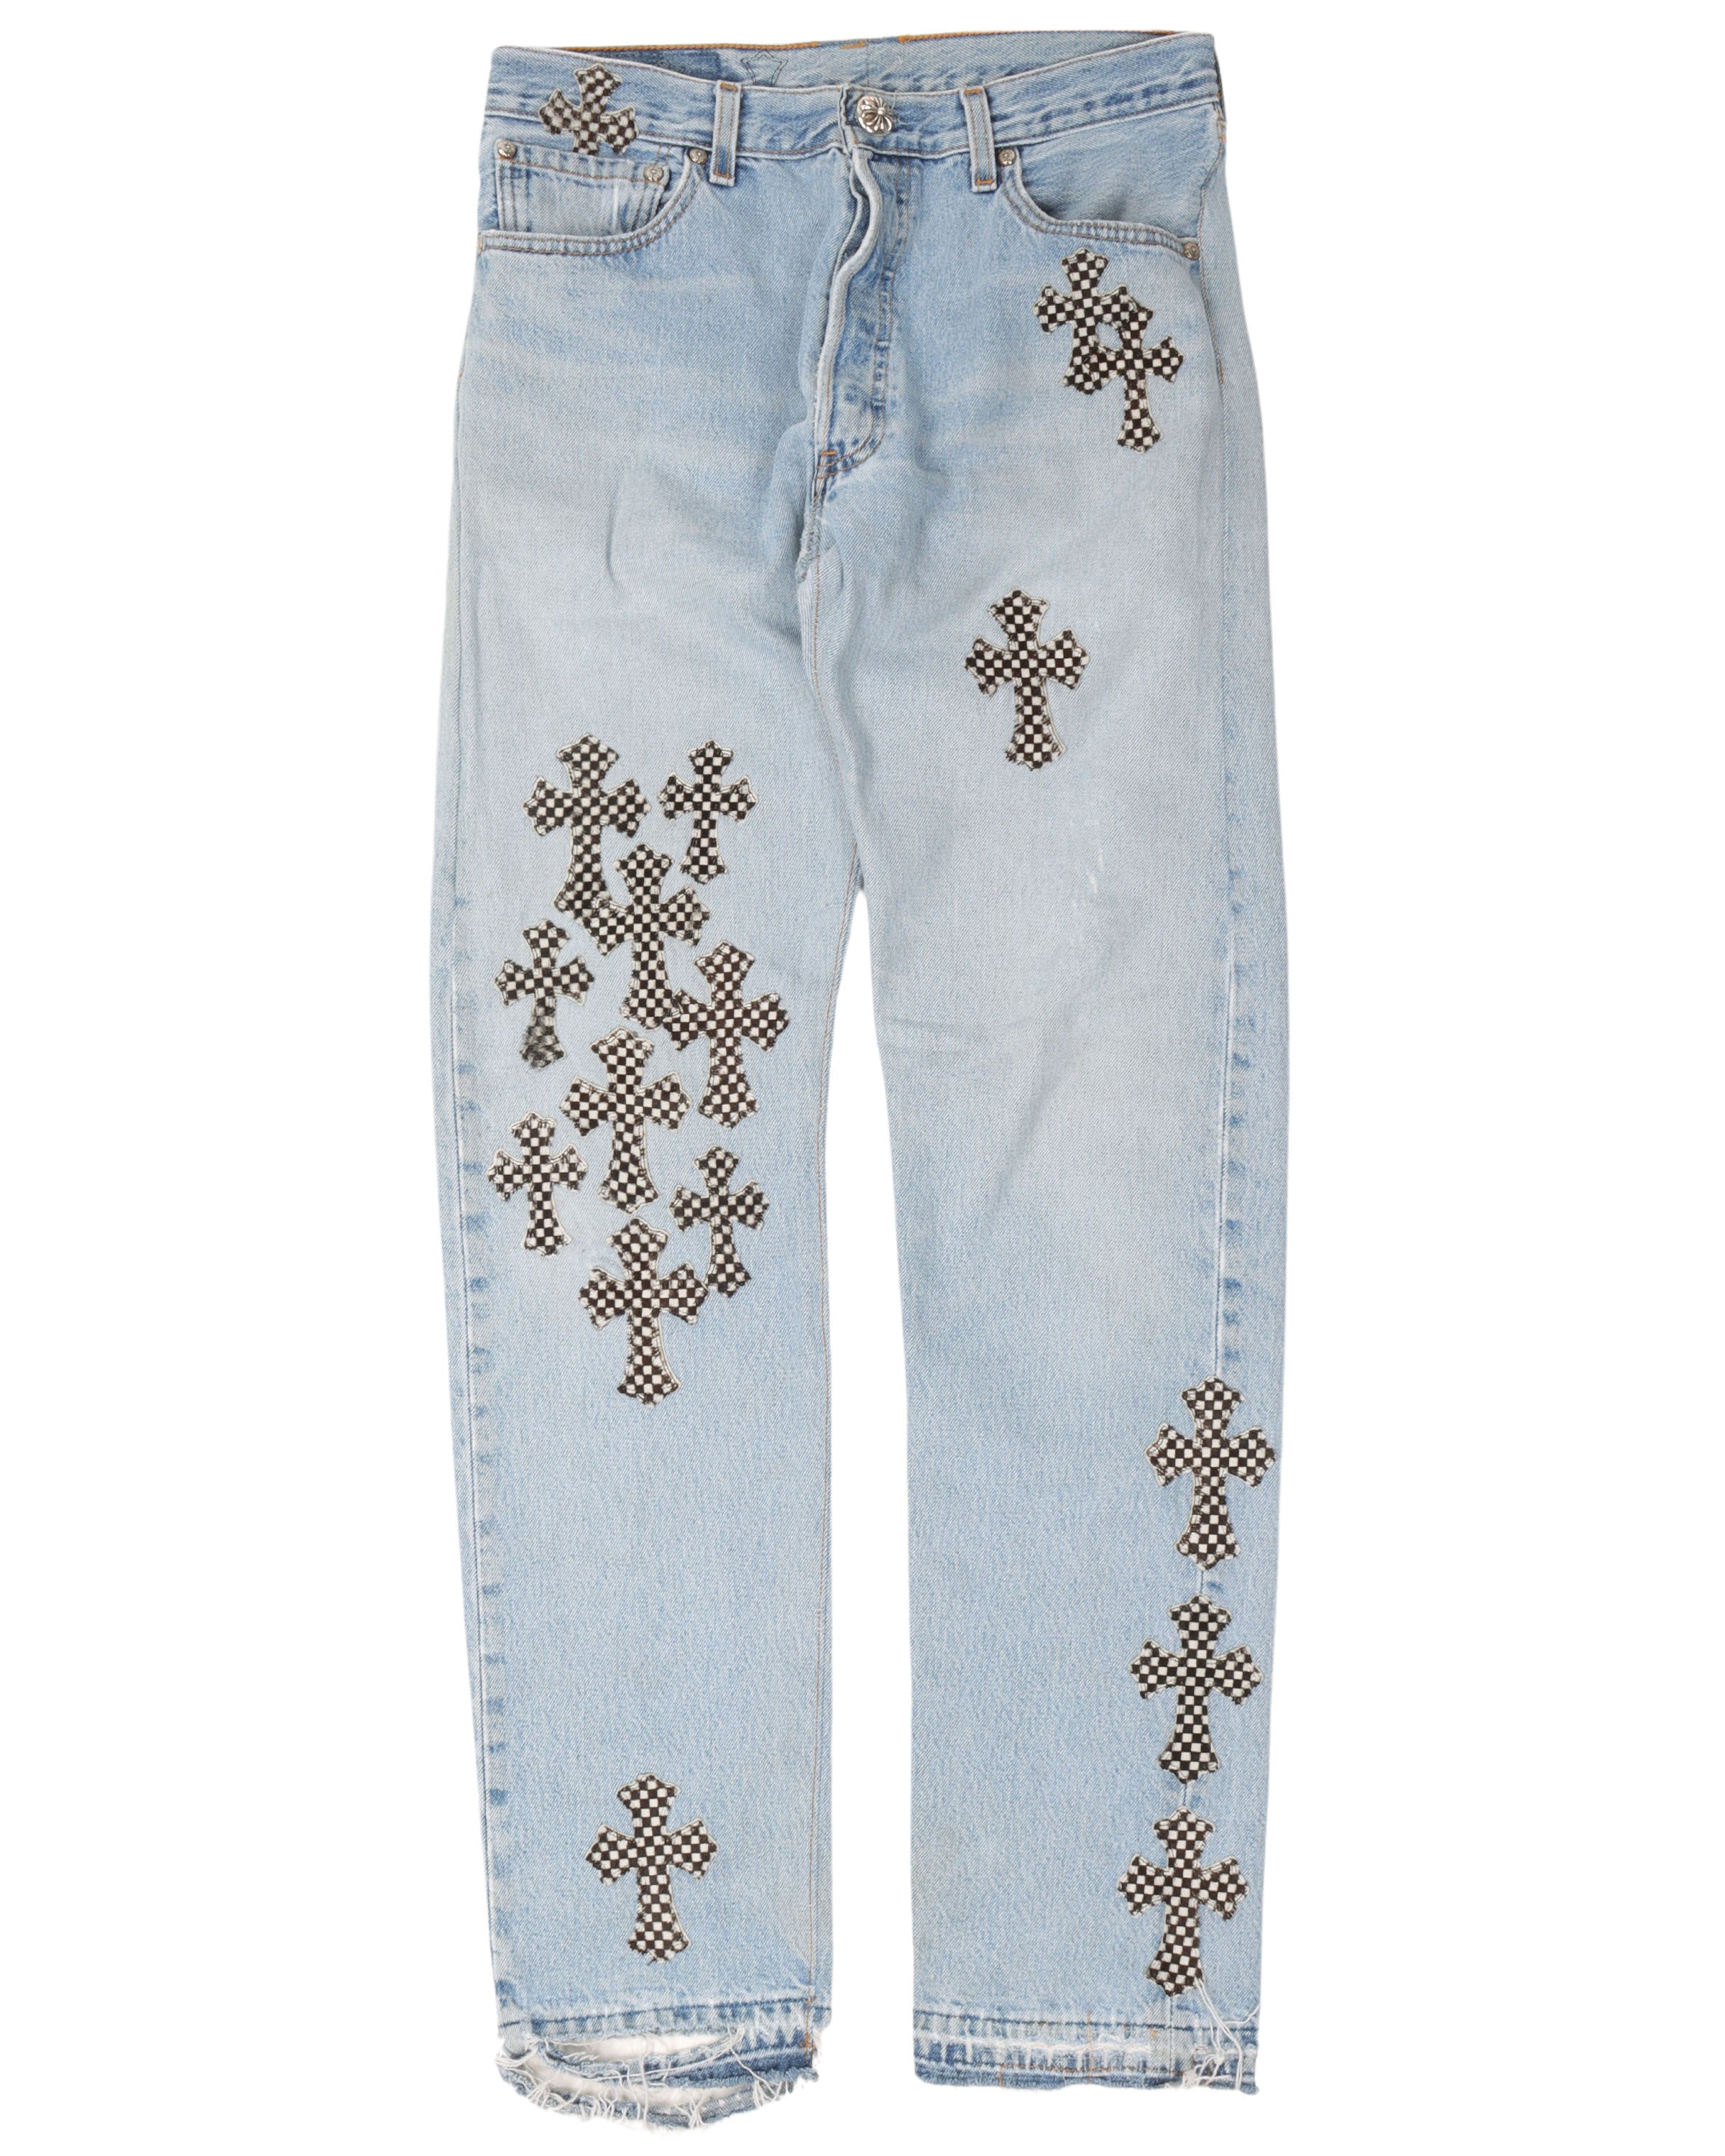 Levi's Checkered Leather Cross Patch Jeans